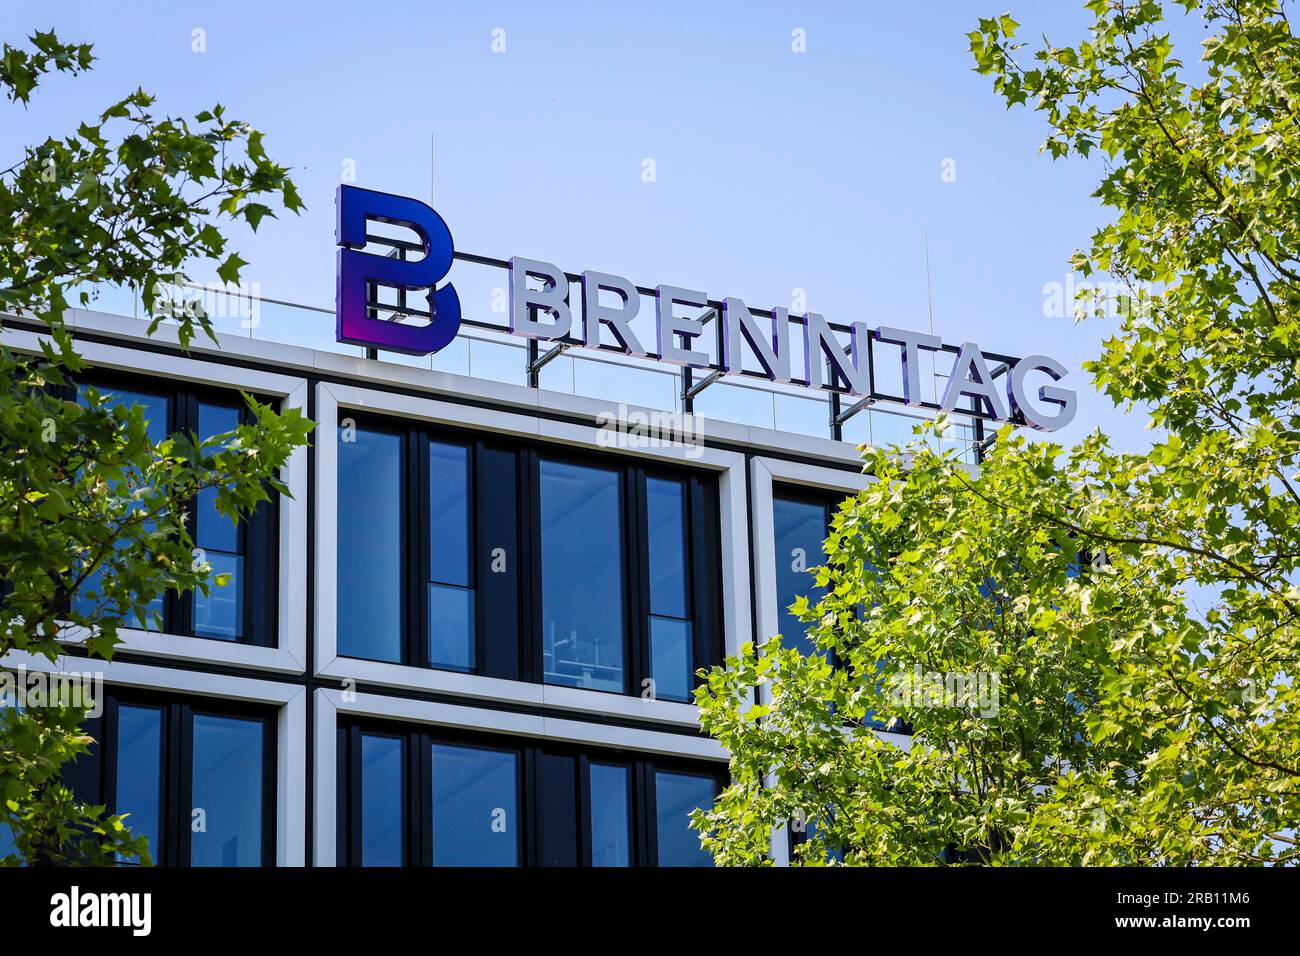 Essen, North Rhine-Westphalia, Germany - Brenntag, company logo on the facade of the Brenntag headquarters, The company is the world market leader in the distribution of chemicals and ingredients Stock Photo